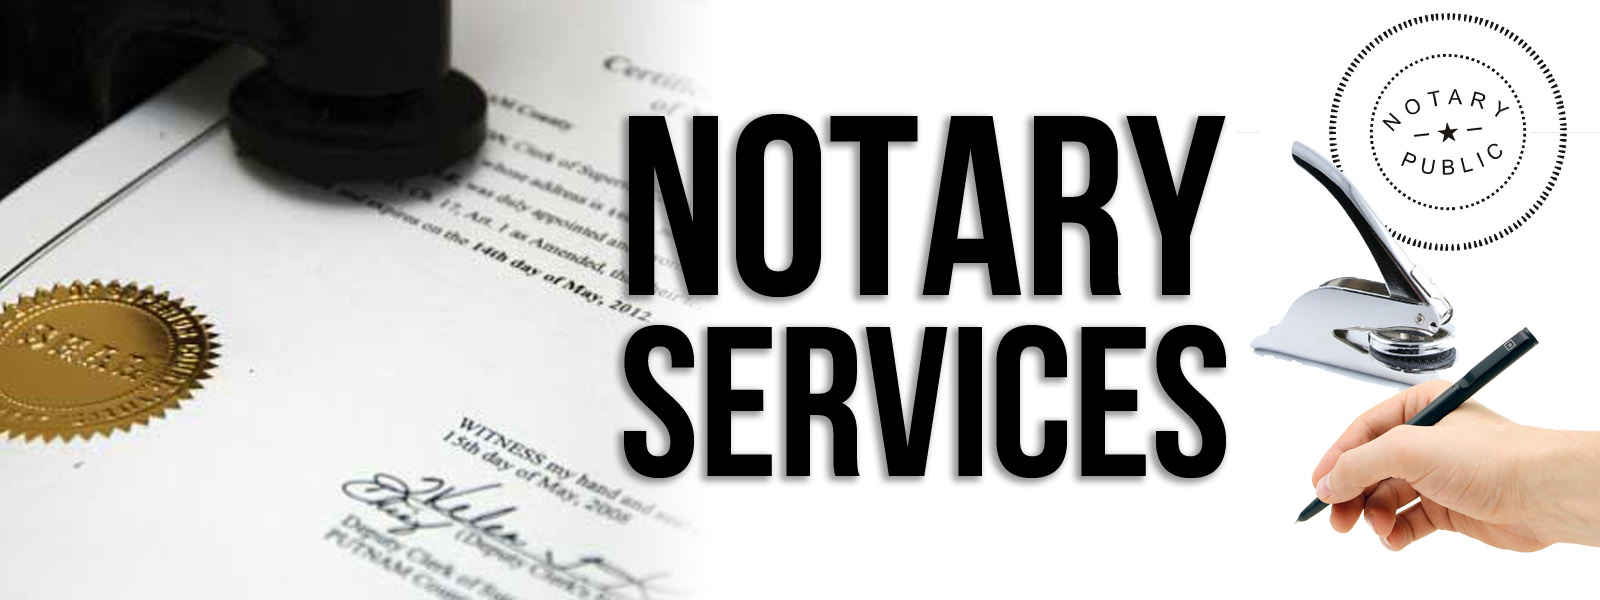 About notary services and how to determine an oath or affirmation